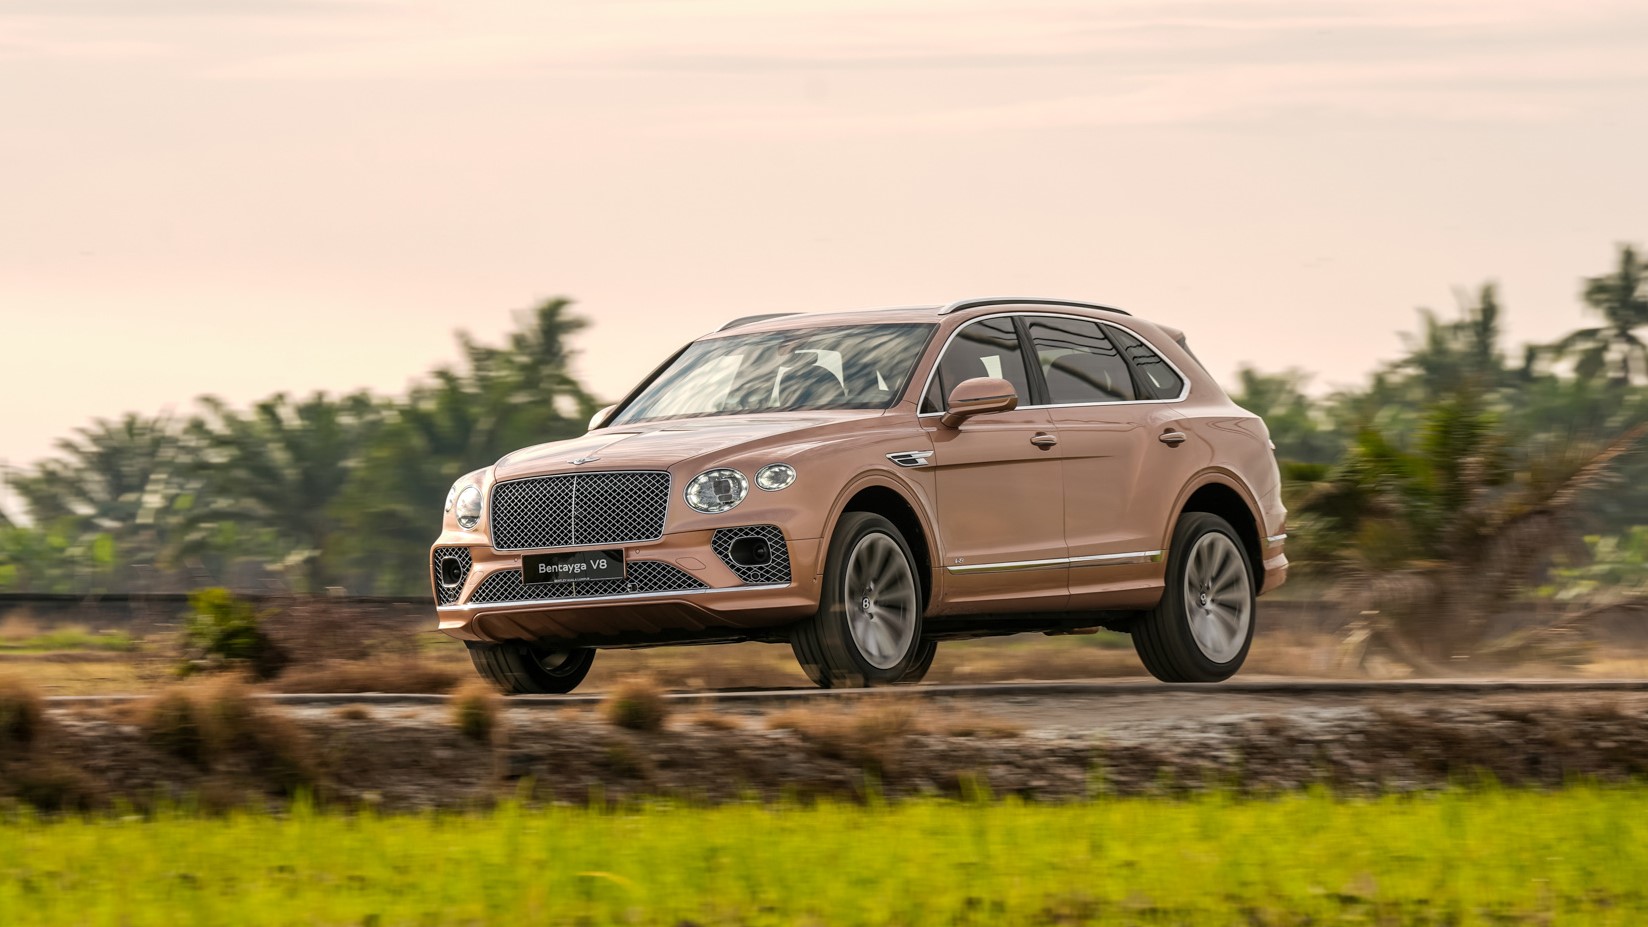 Bentley Bentayga review: “best SUV in the world” tested in Malaysia